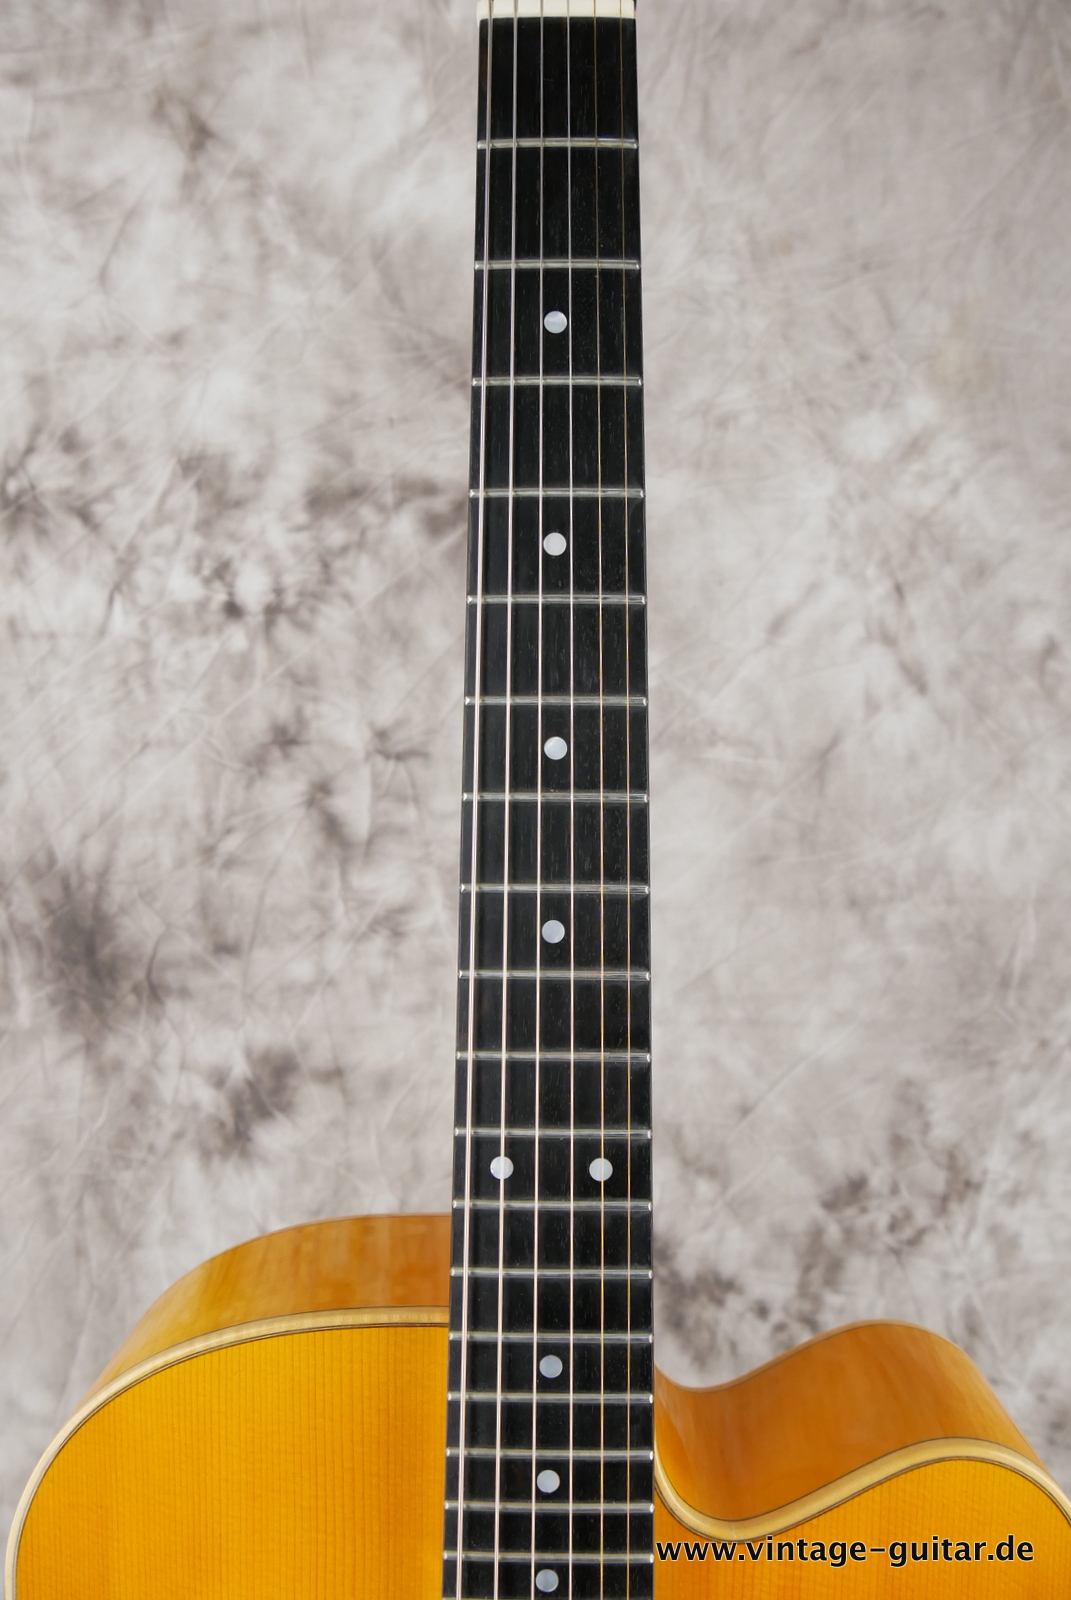 Launhardt_Fs3_german_guitar_archtop_all_solid-011.JPG